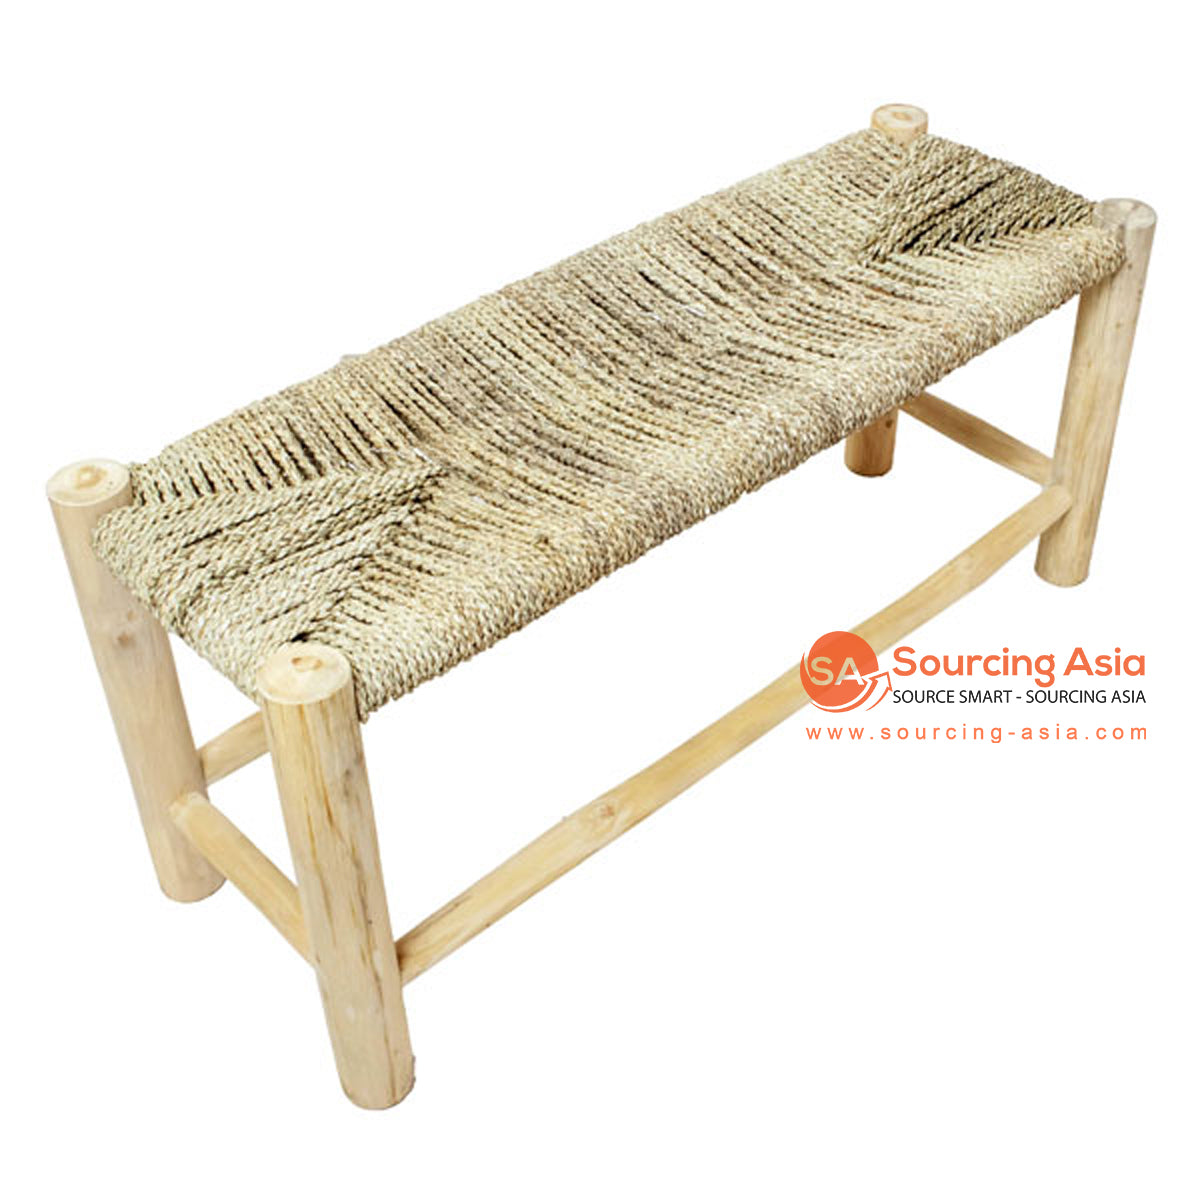 SHL174-1 NATURAL TEAK WOOD BENCH WITH SEAGRASS SEAT